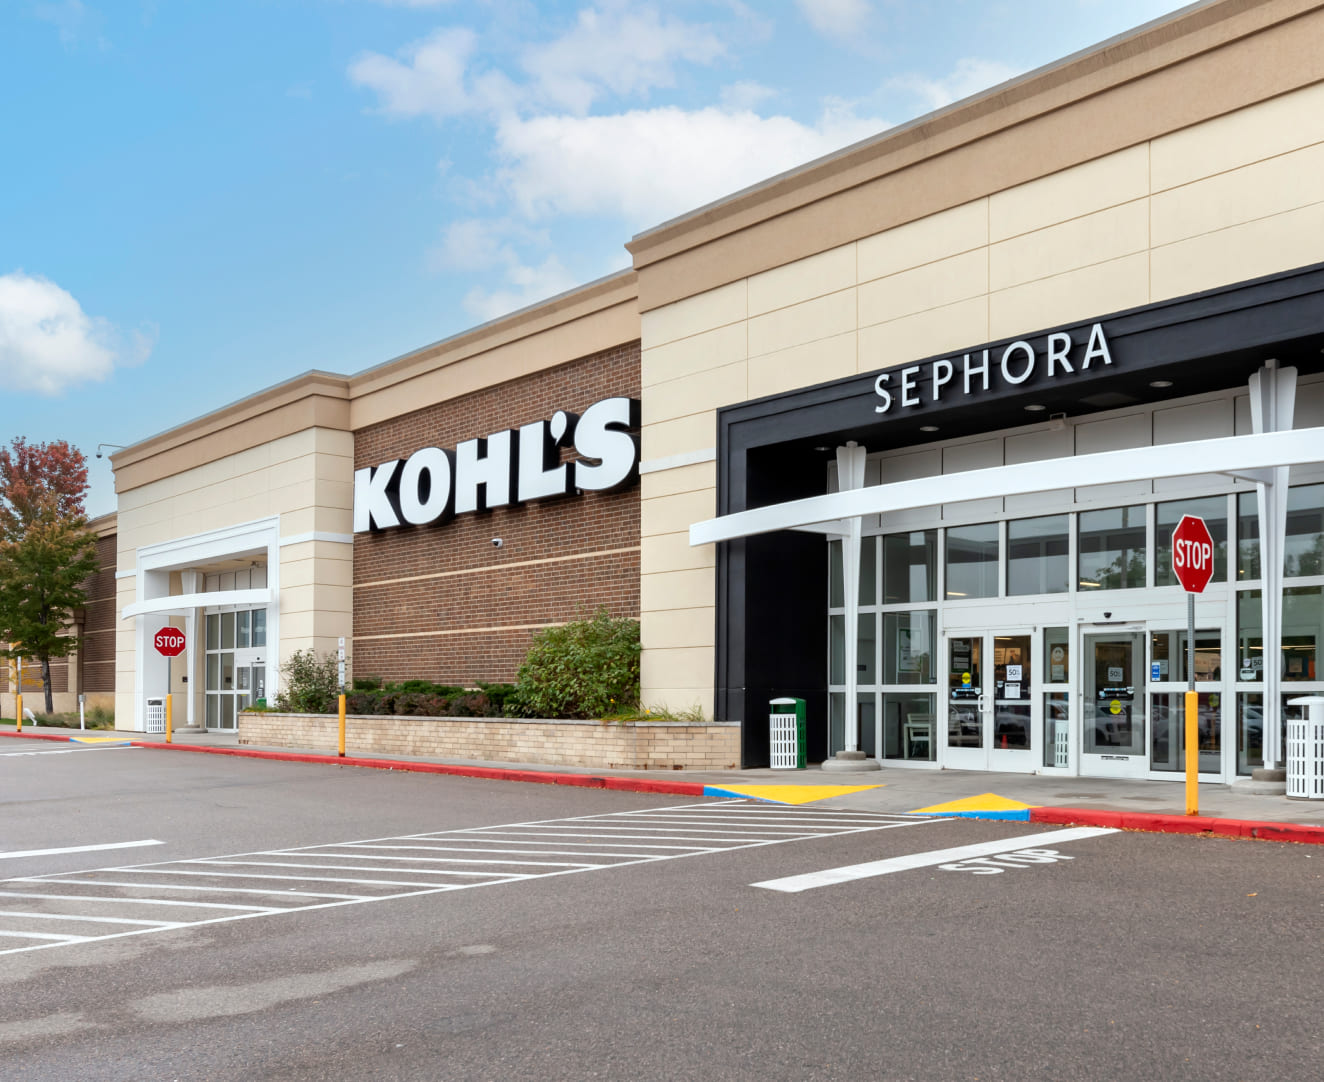 The exterior of the Kohl's and Sephora at 813-831 Harmony Road in Fort Collins, CO.